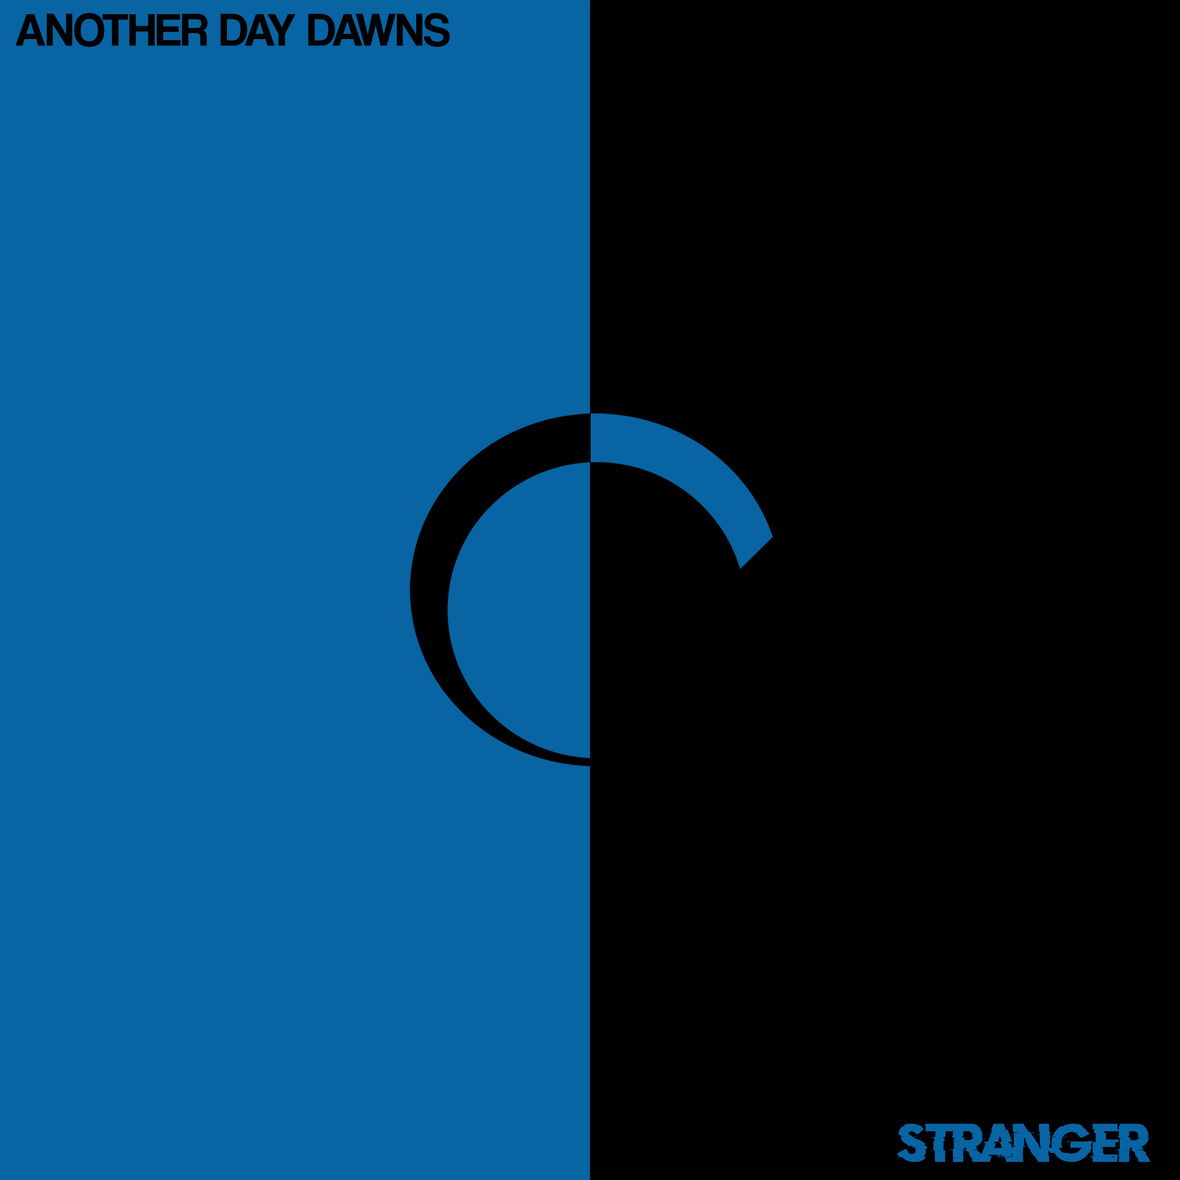 Another Day Dawns - "Stranger" EP